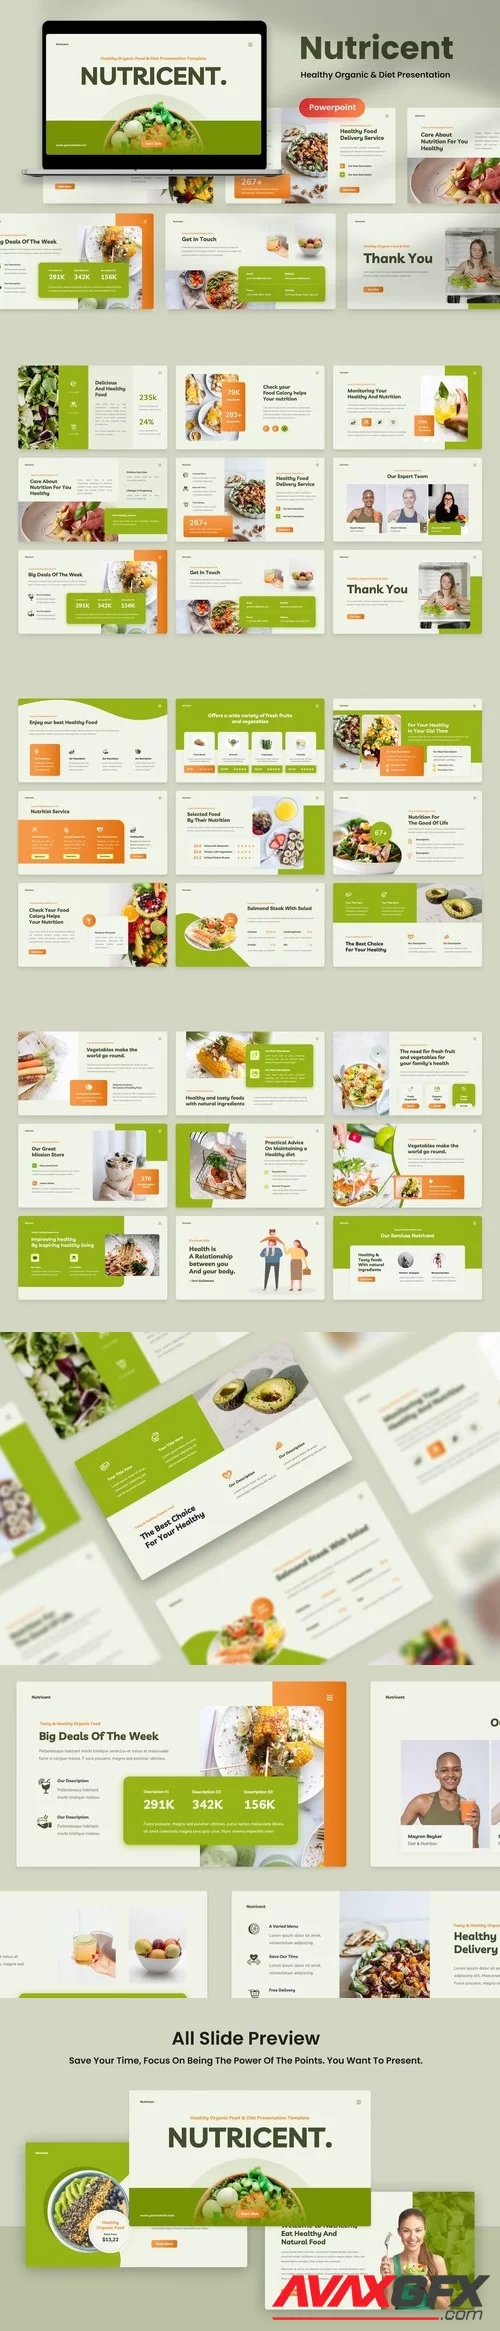 Nutricent - Healthy Organic Food Diet PowerPoint, Keynote and Google Slides [PPTX]